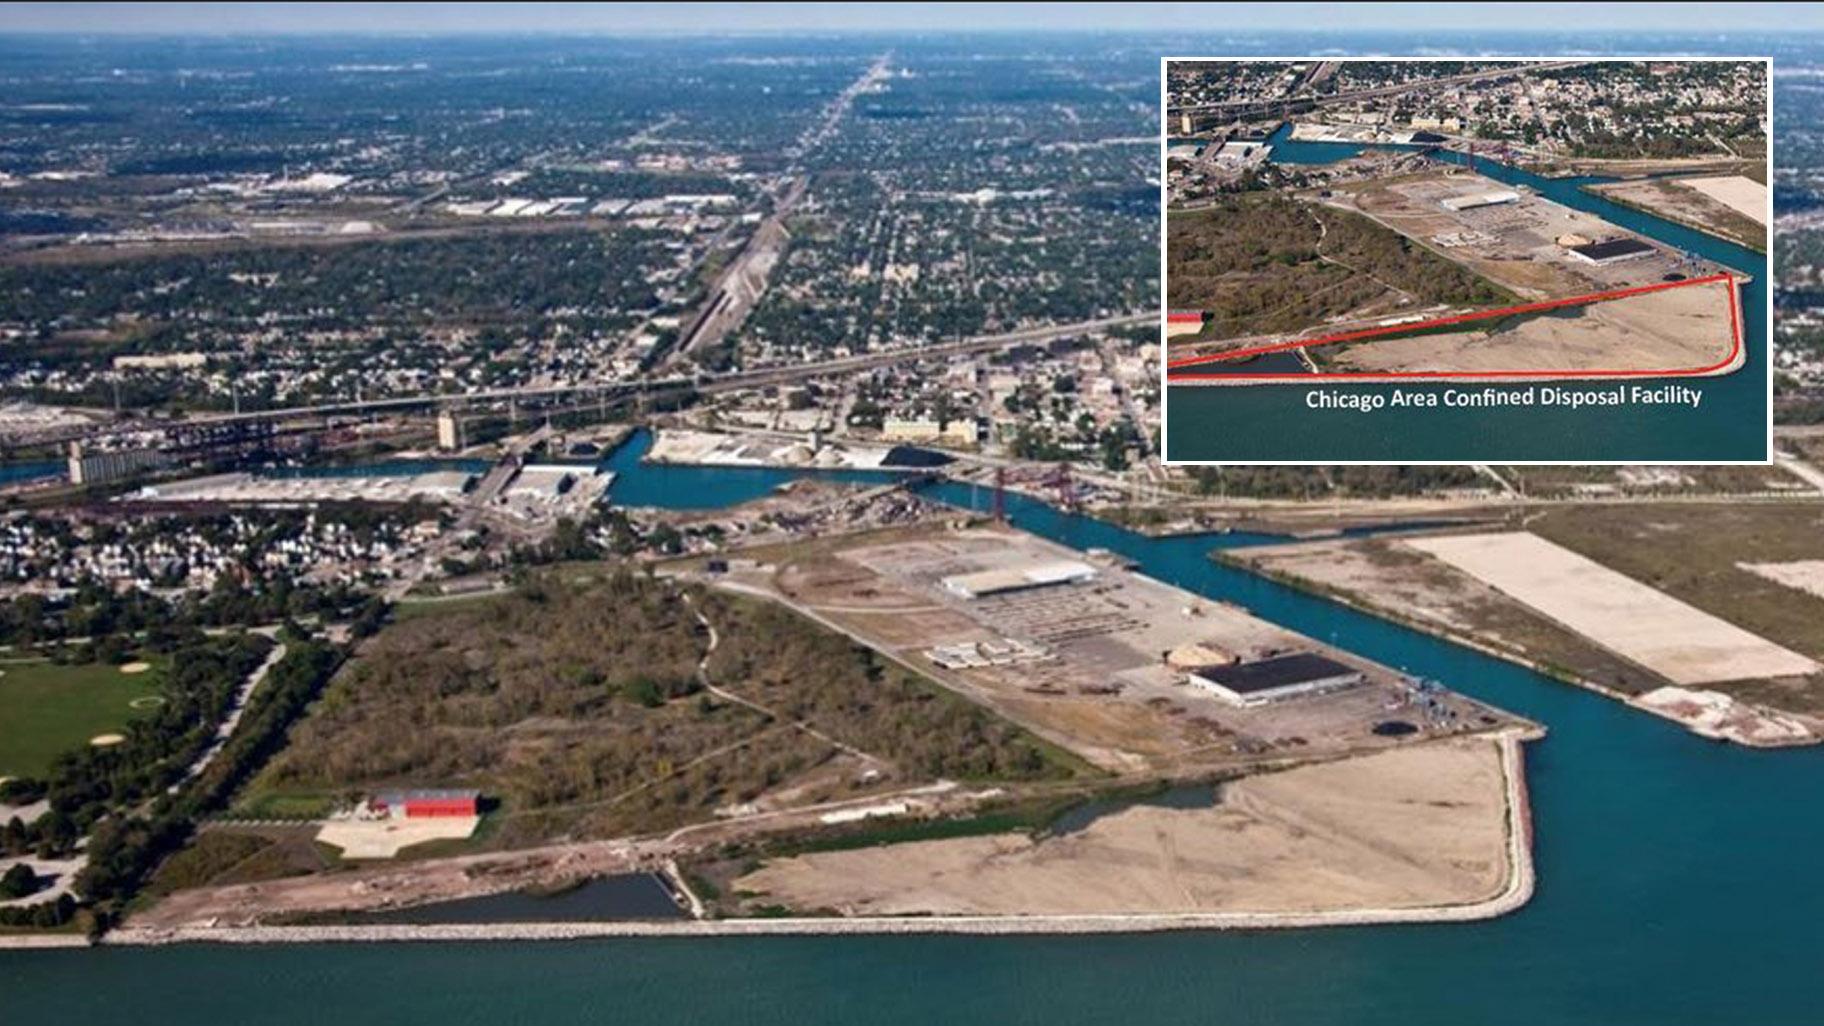 An aerial view of the Chicago Area Confined Disposal Facility, a 45-acre site on Chicago’s Southeast Side that has been in operation since 1984. Inset: The CDF is outlined in red. (Credit: Army Corps of Engineers)